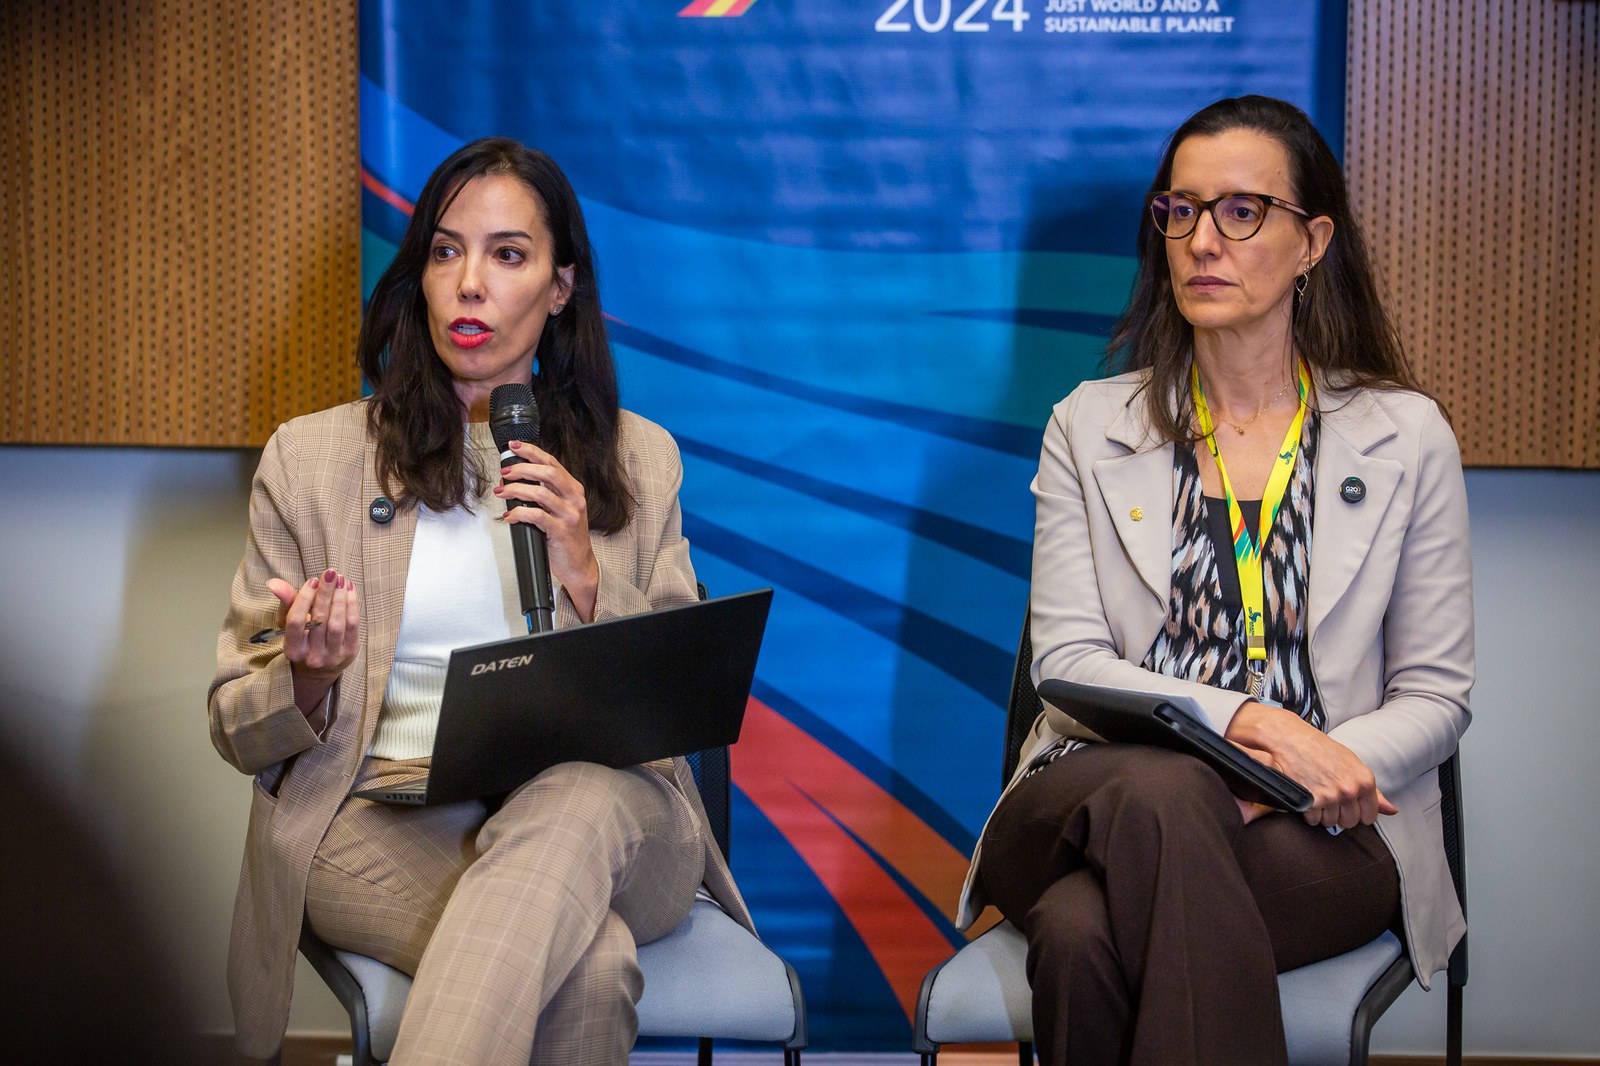 Cyntia Azevedo, from the Banco Central do Brasil; and Júlia Braga, from the Ministry of Finance, presented the main topics under discussion at the G20 Global Economy WG meeting held this week in Brasília | Photo: Diogo Zacarias/MF